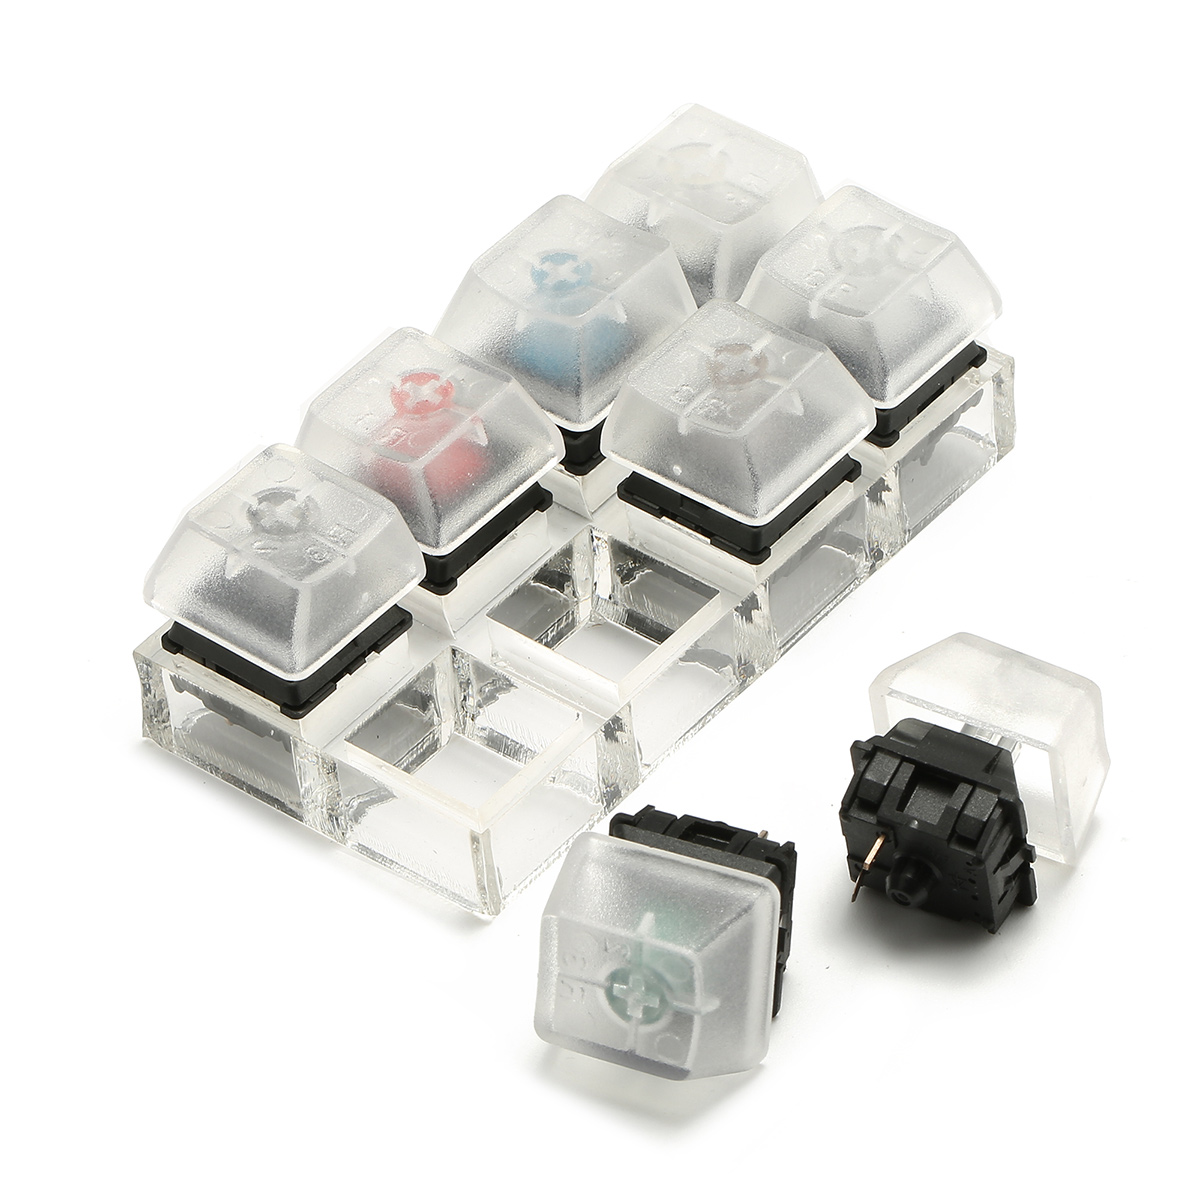 

8 Key Mechanical Keyboards Switch Tester Kit Keycaps Switches Sampler For Cherry MX